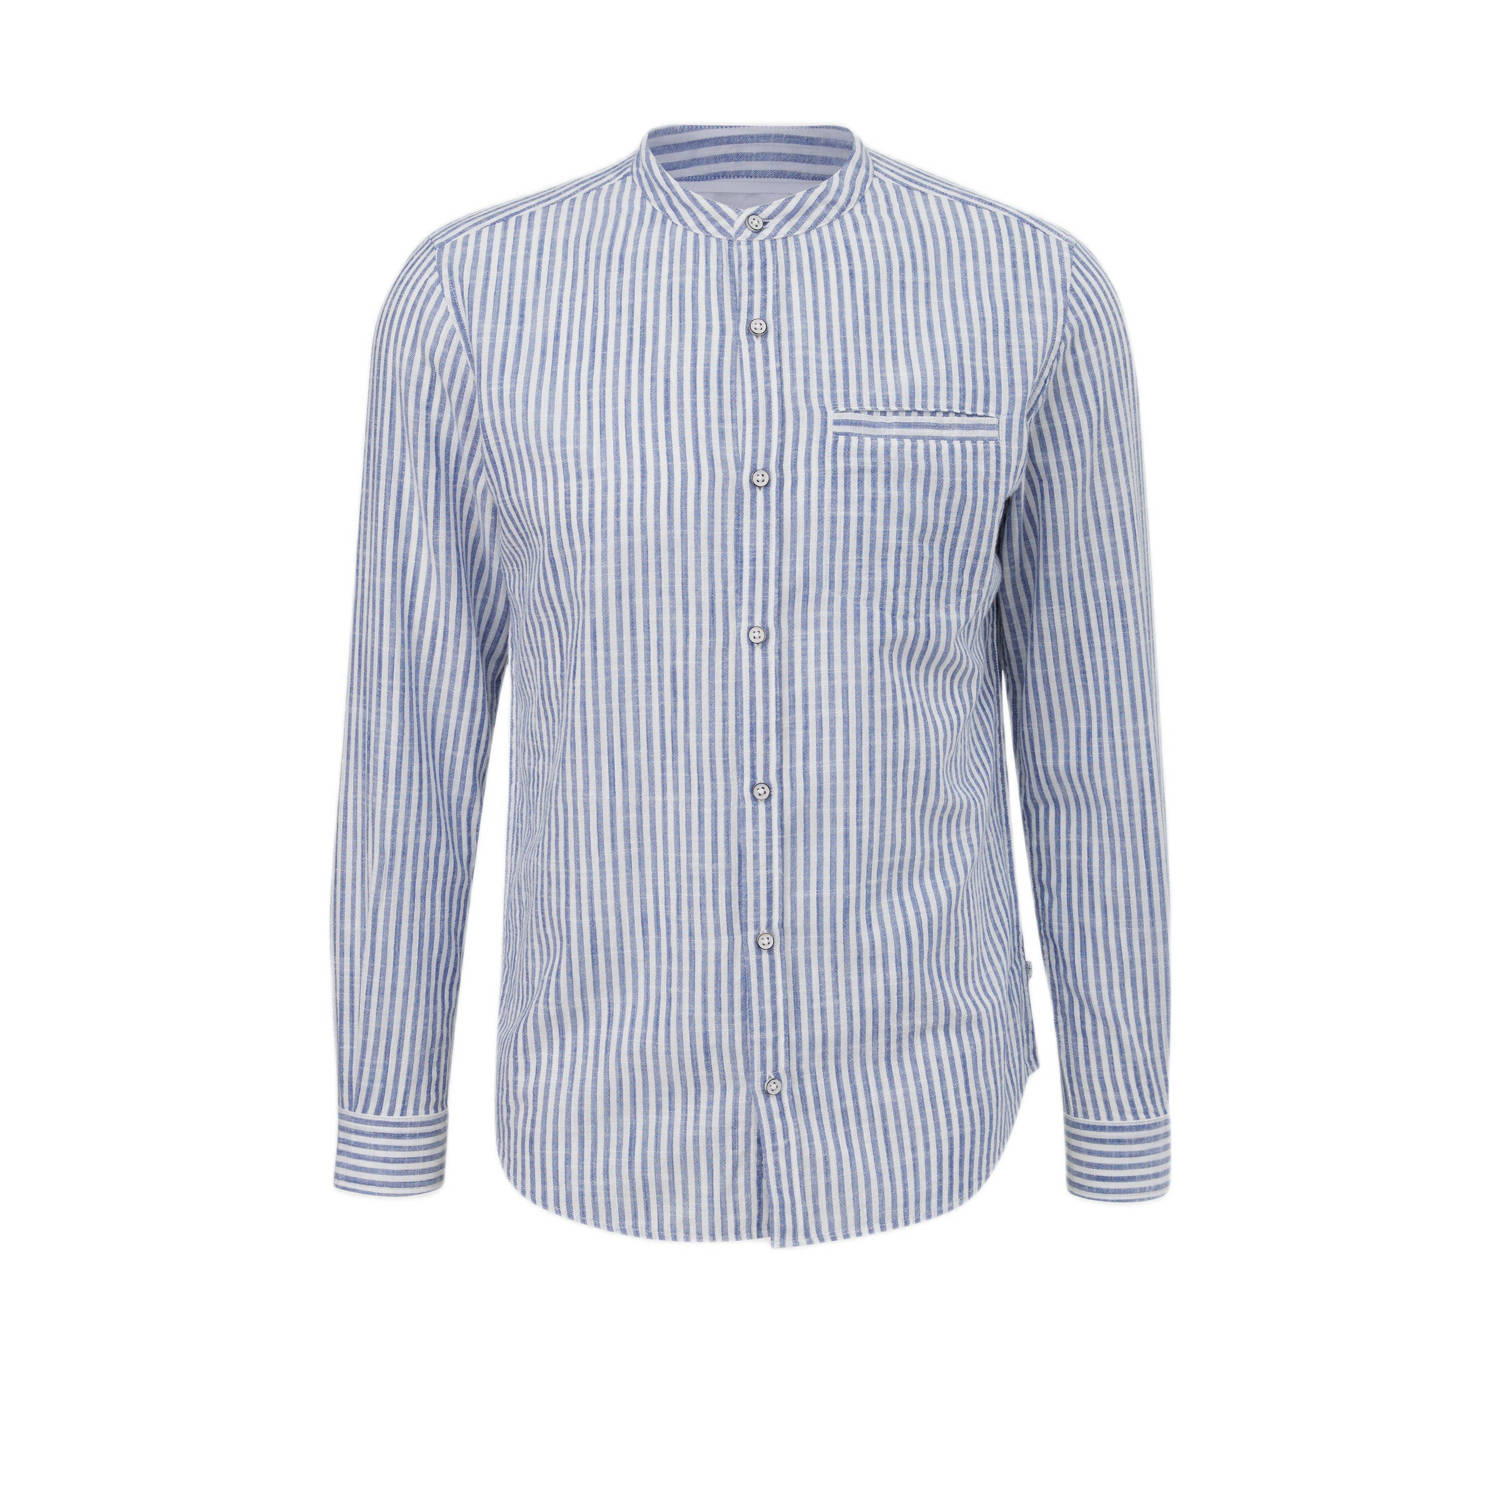 Q S by s.Oliver gestreept slim fit overhemd blauw